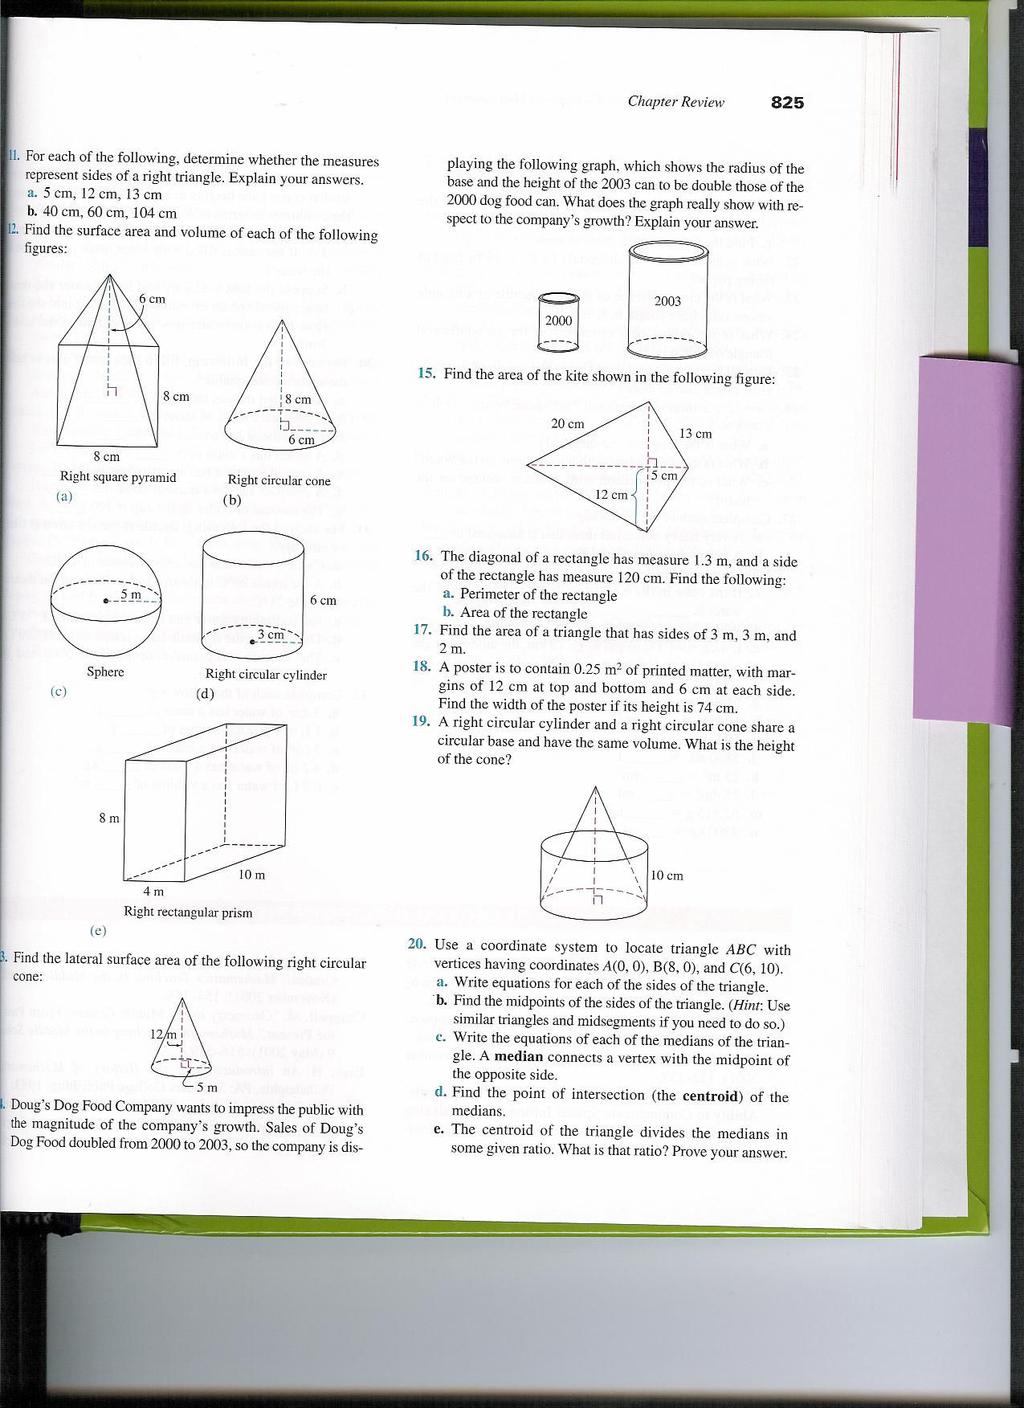 17. Find the area of a triangle that has sides of 3 m, 3 m, and 2 m. 18. A poster is to contain 0.25 m 2 of printed matter, with margins of 12 cm at top and bottom and 6 cm at each side.